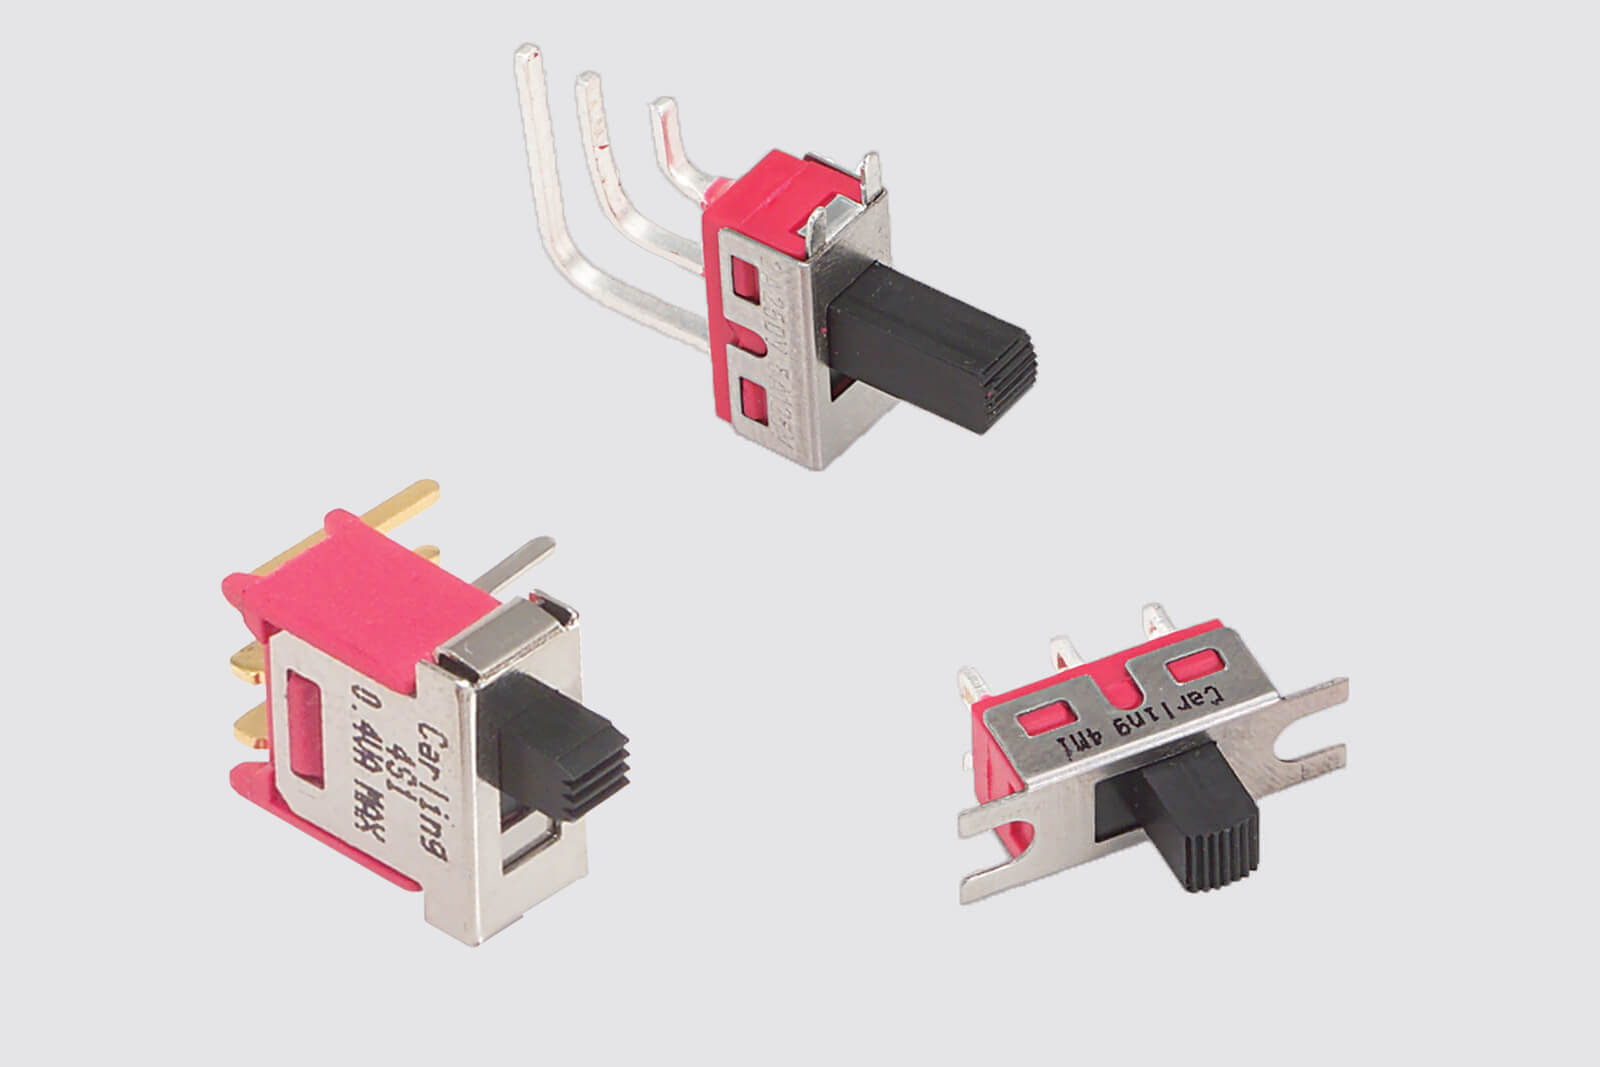 slide switches